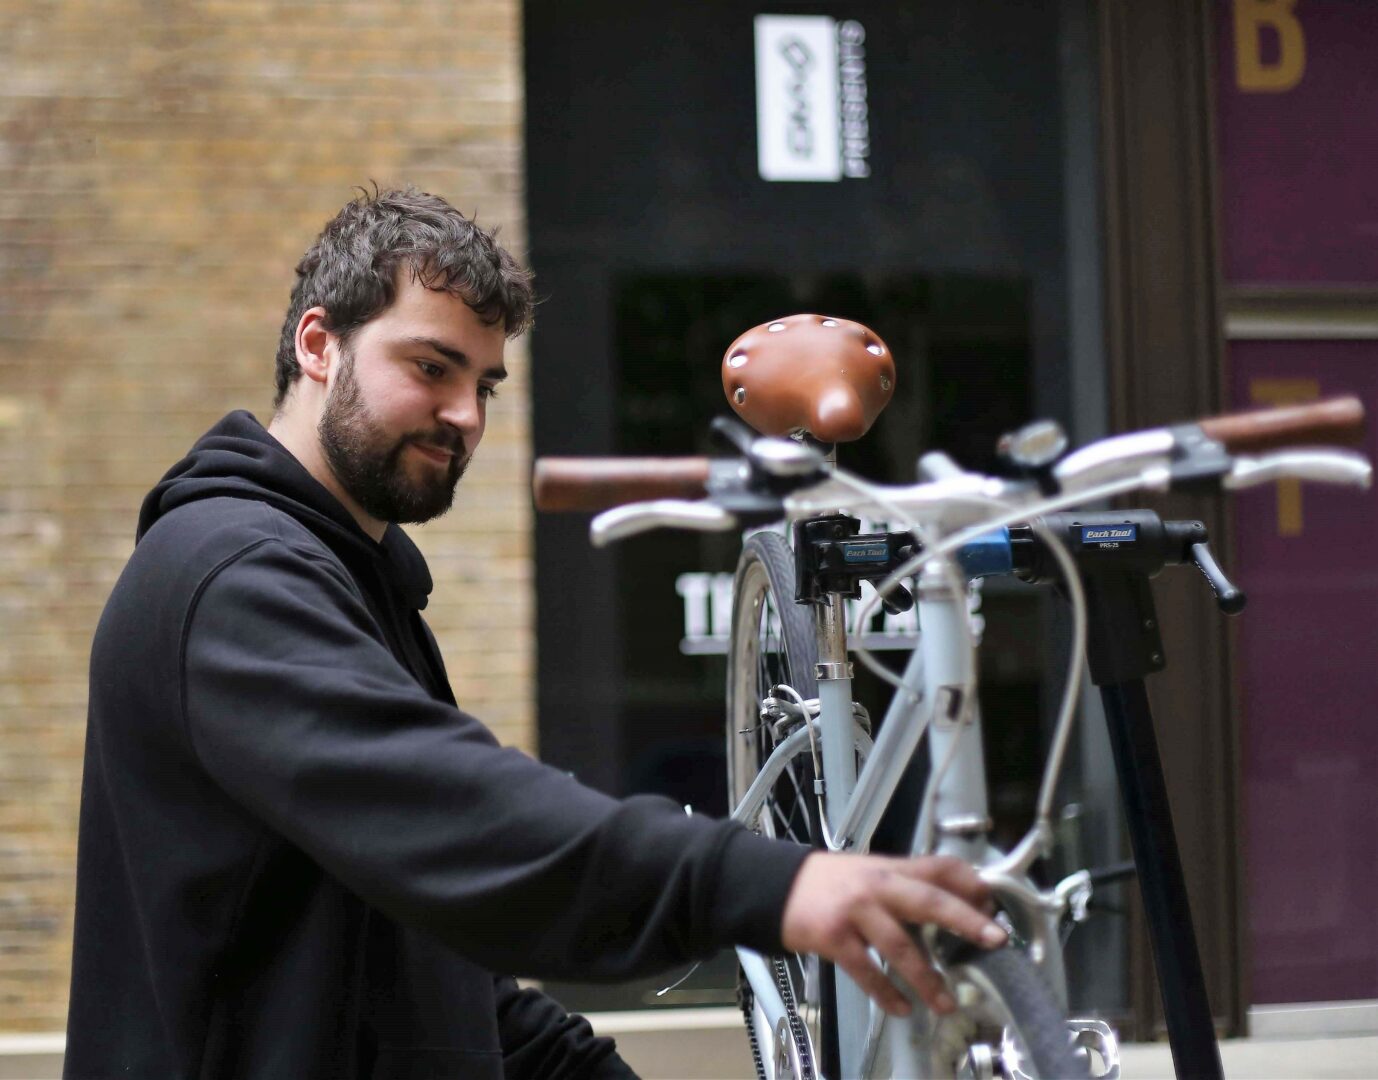 FREE bike servicing and repairs to all Devonshire Square’s cyclists